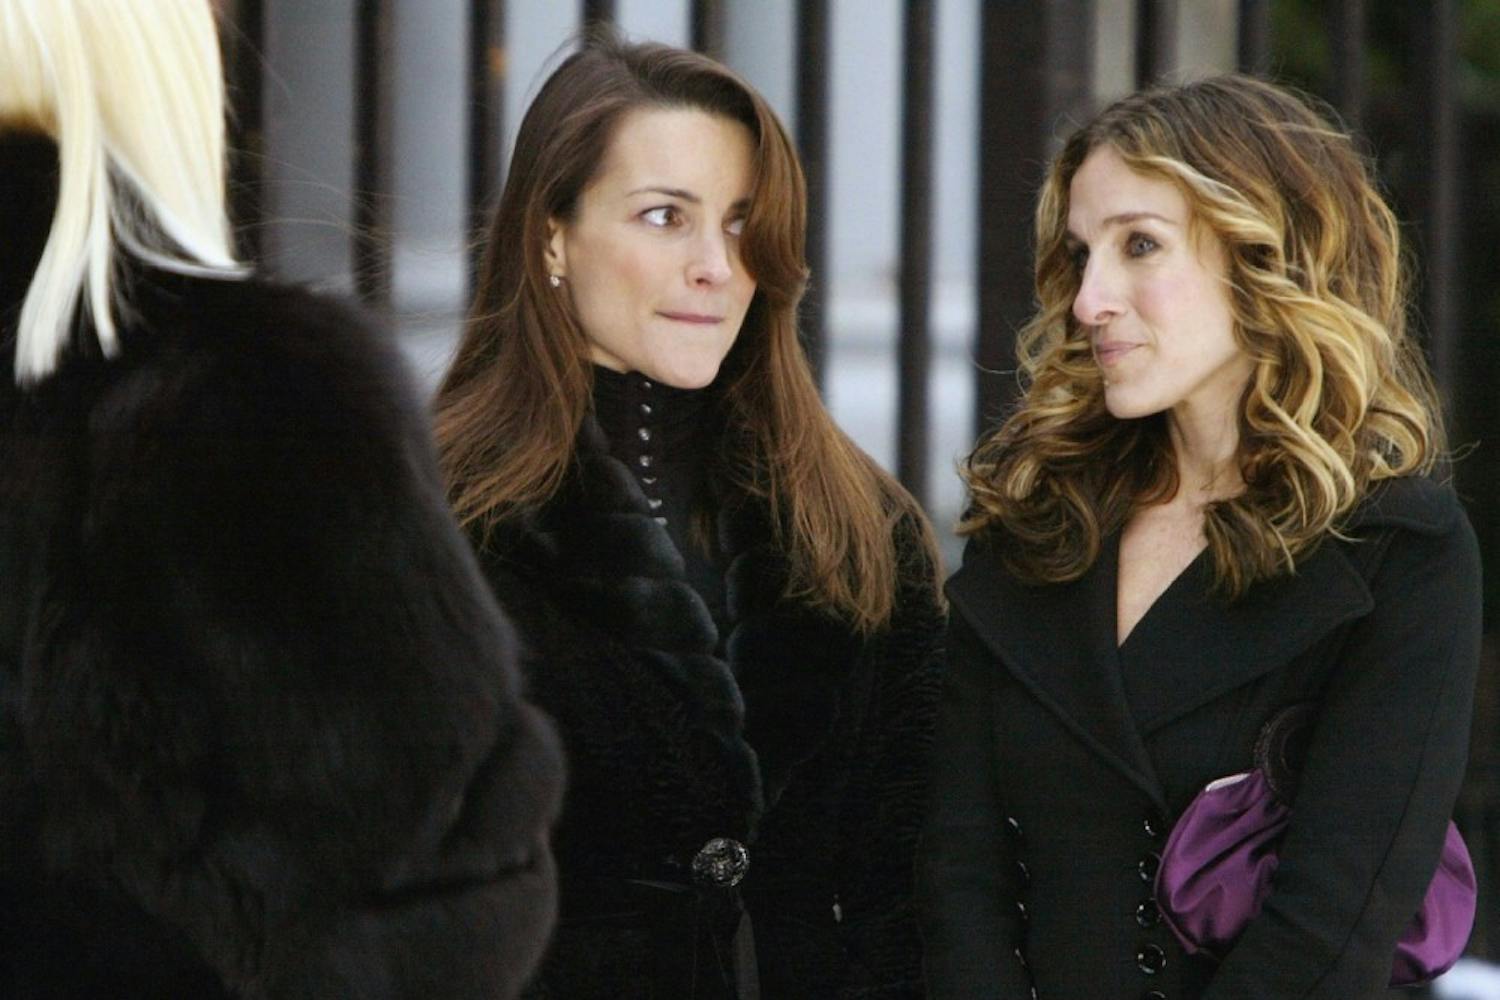 Sarah Jessica Parker and Kristin Davis in Sex and the City in 1998.